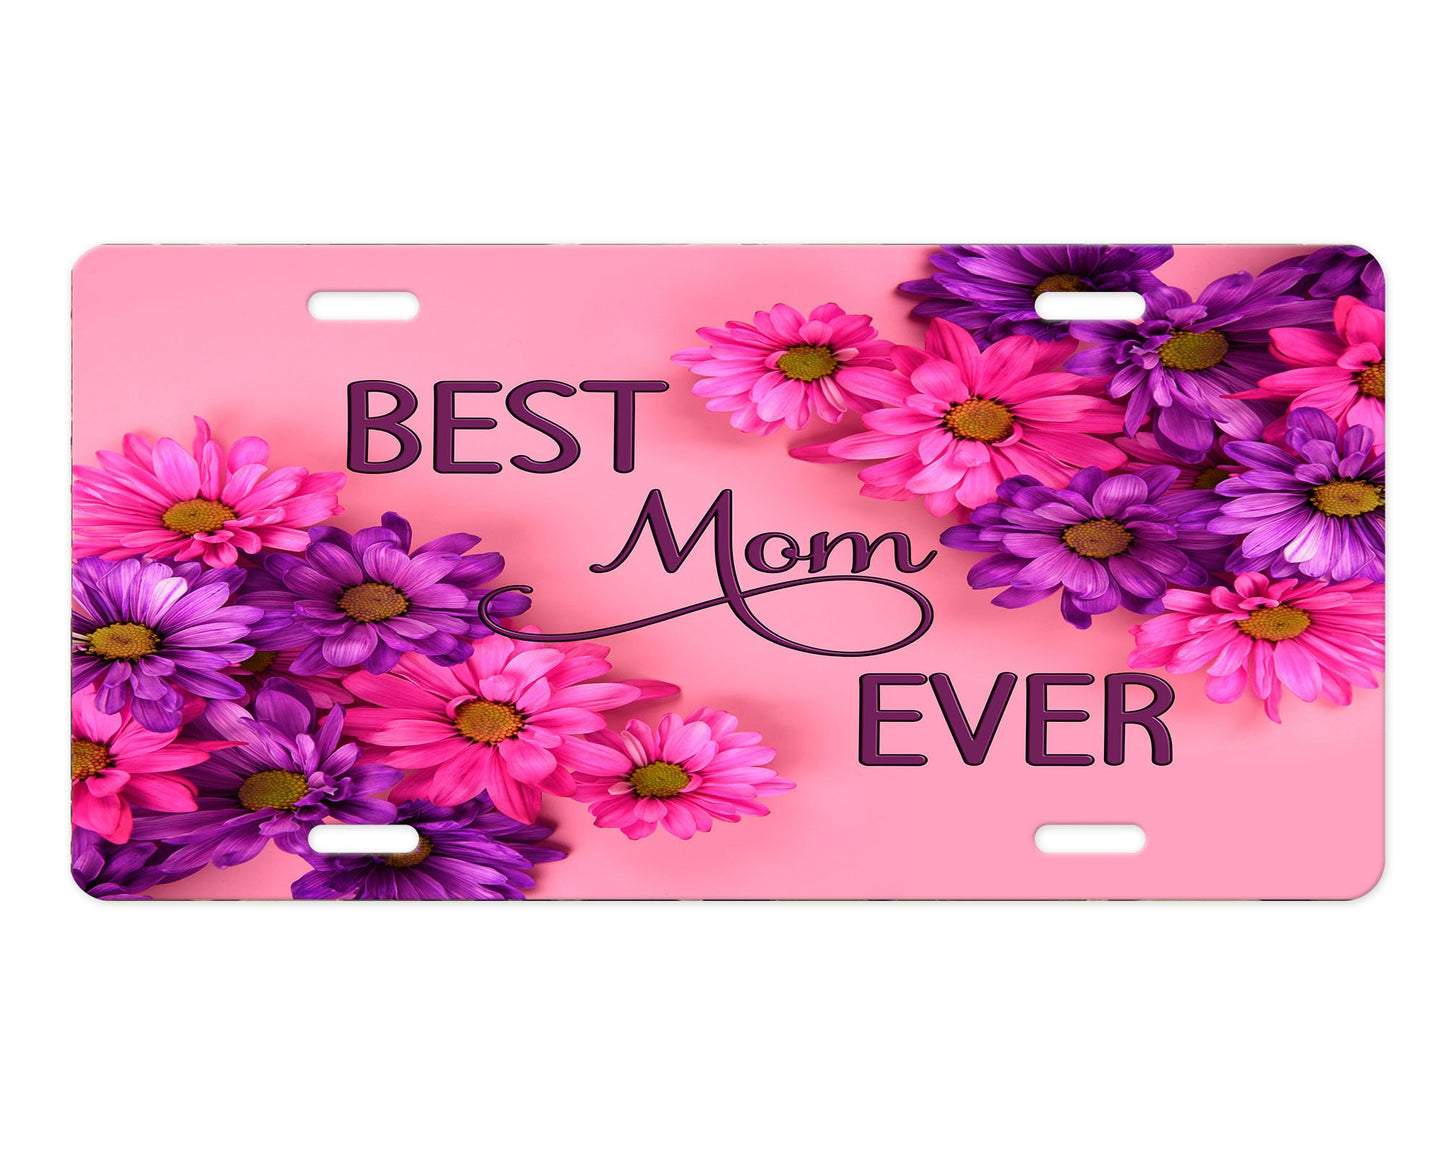 Best Mom Ever Pink and Purple Floral Aluminum Front License Plate